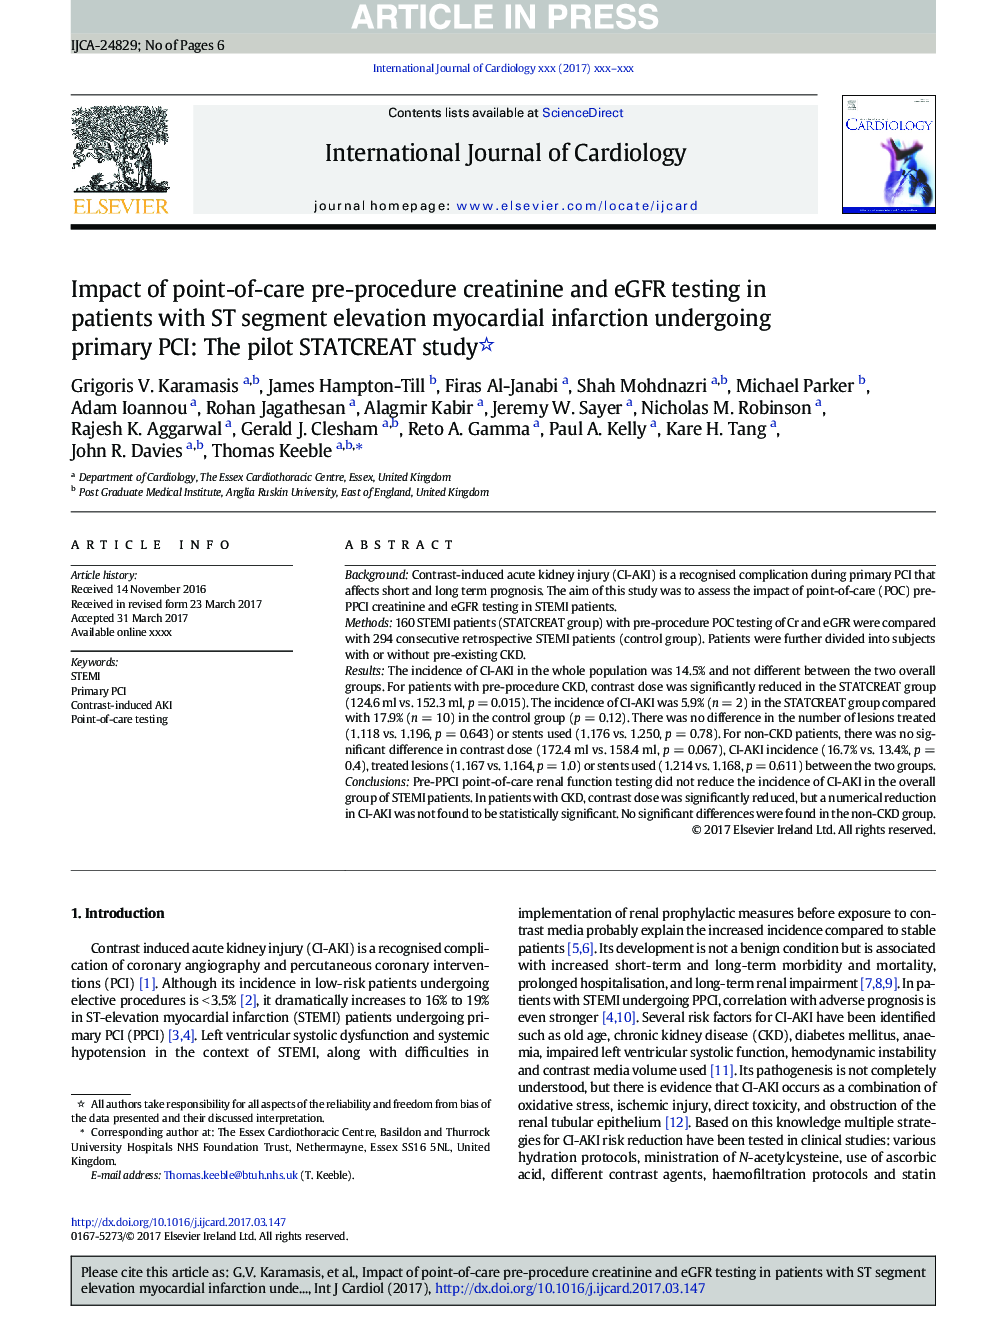 Impact of point-of-care pre-procedure creatinine and eGFR testing in patients with ST segment elevation myocardial infarction undergoing primary PCI: The pilot STATCREAT study